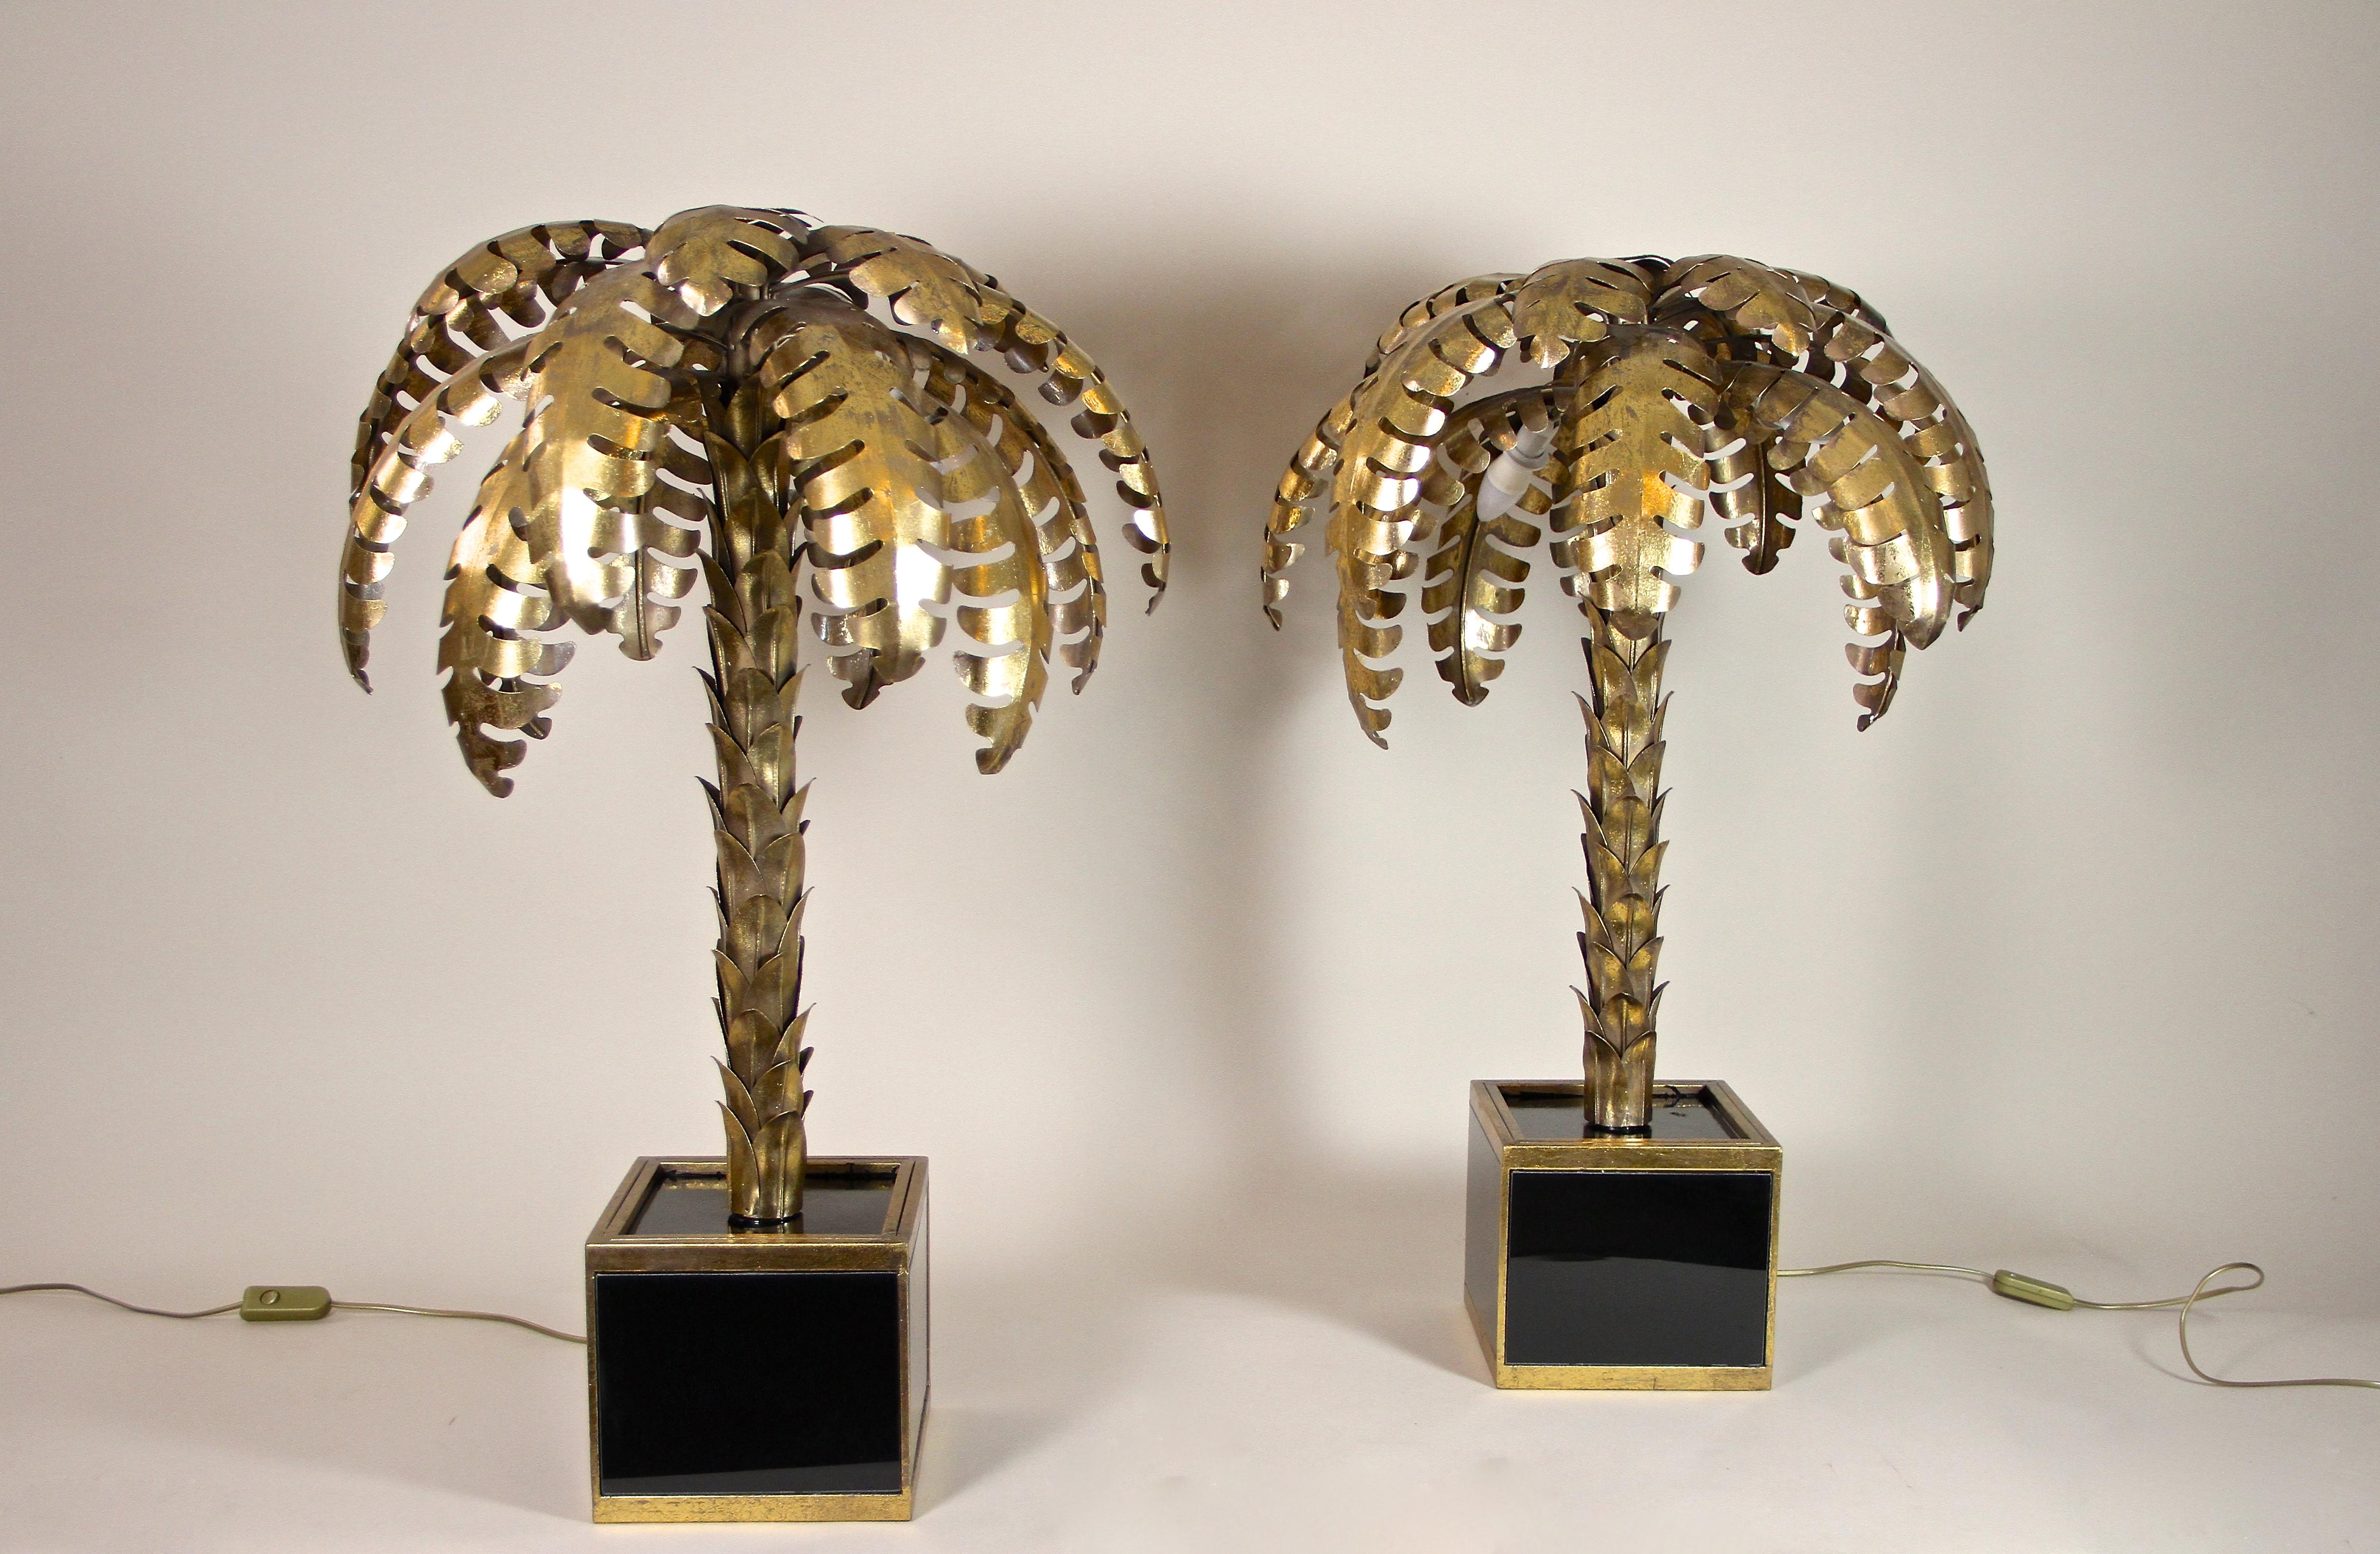 Exceptional pair of 1970s Brass Palm table lamps attributed to Maison Jansen in France. made out of brass around 1970, these artfully shaped table lamps are true design icons. This matchless Hollywood Regency style lamps impress with a fantastic